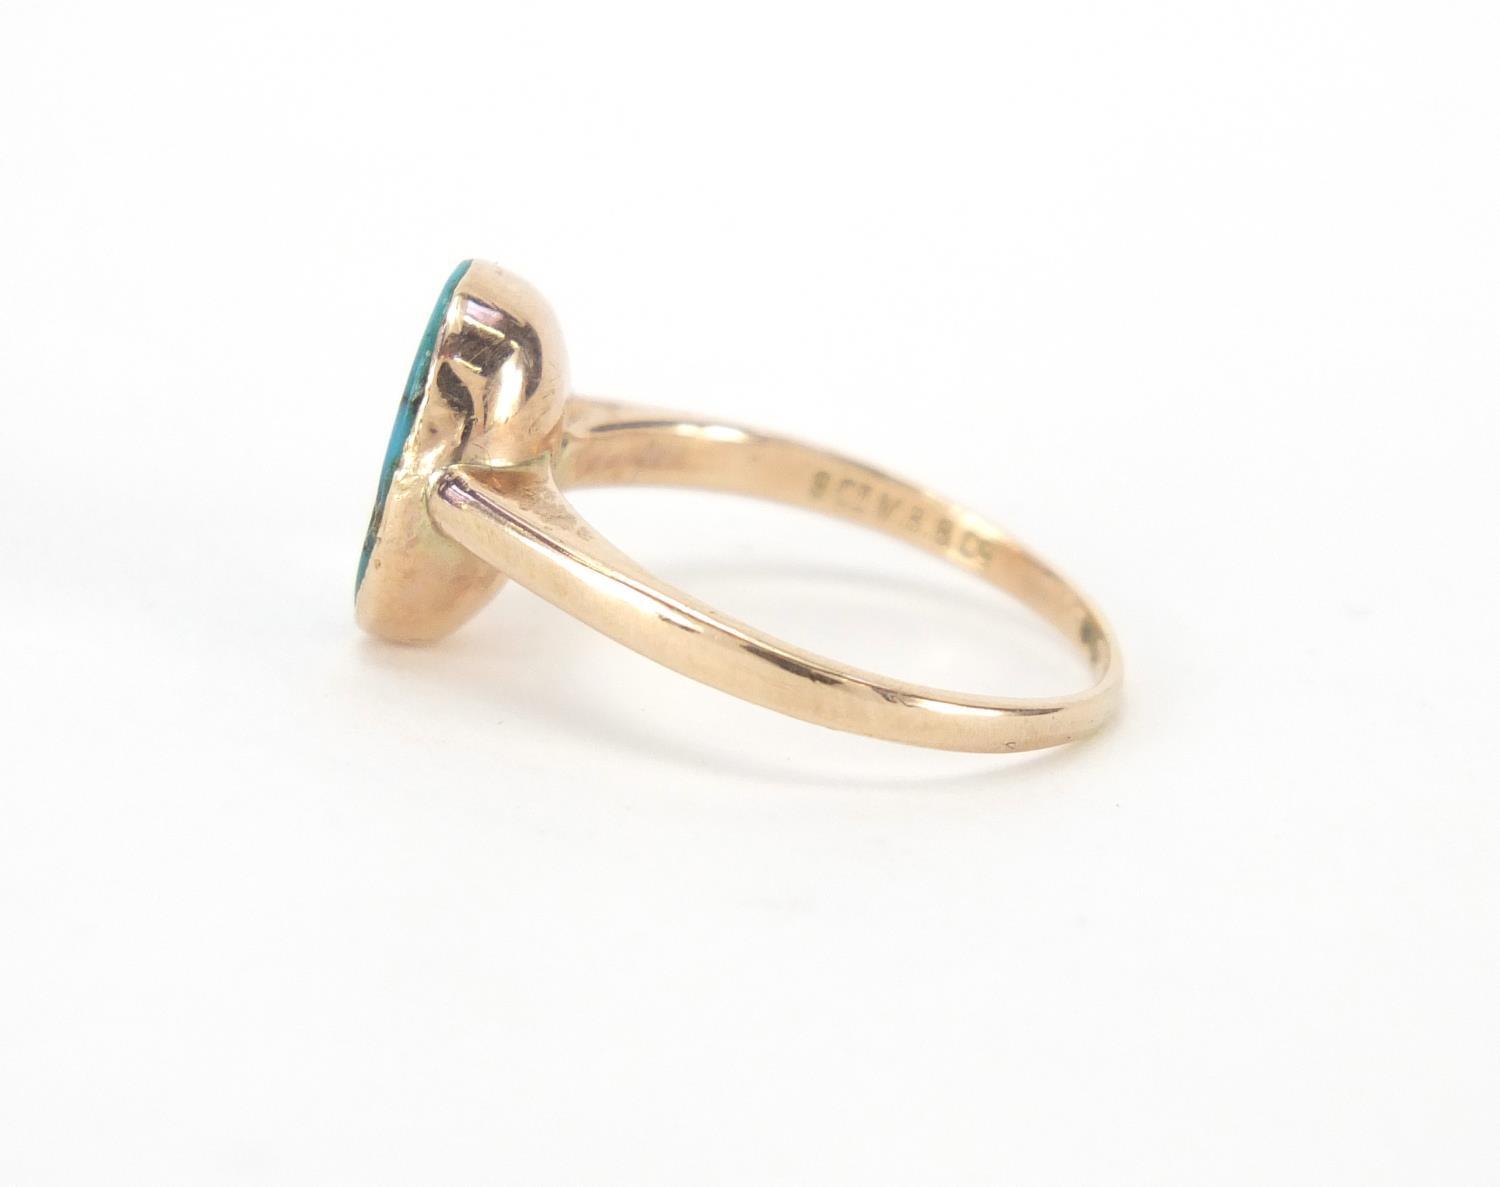 Murrle Bennett & Co 9ct gold and turquoise ring, size K, approximate weight 2.0g : For extra - Image 2 of 5